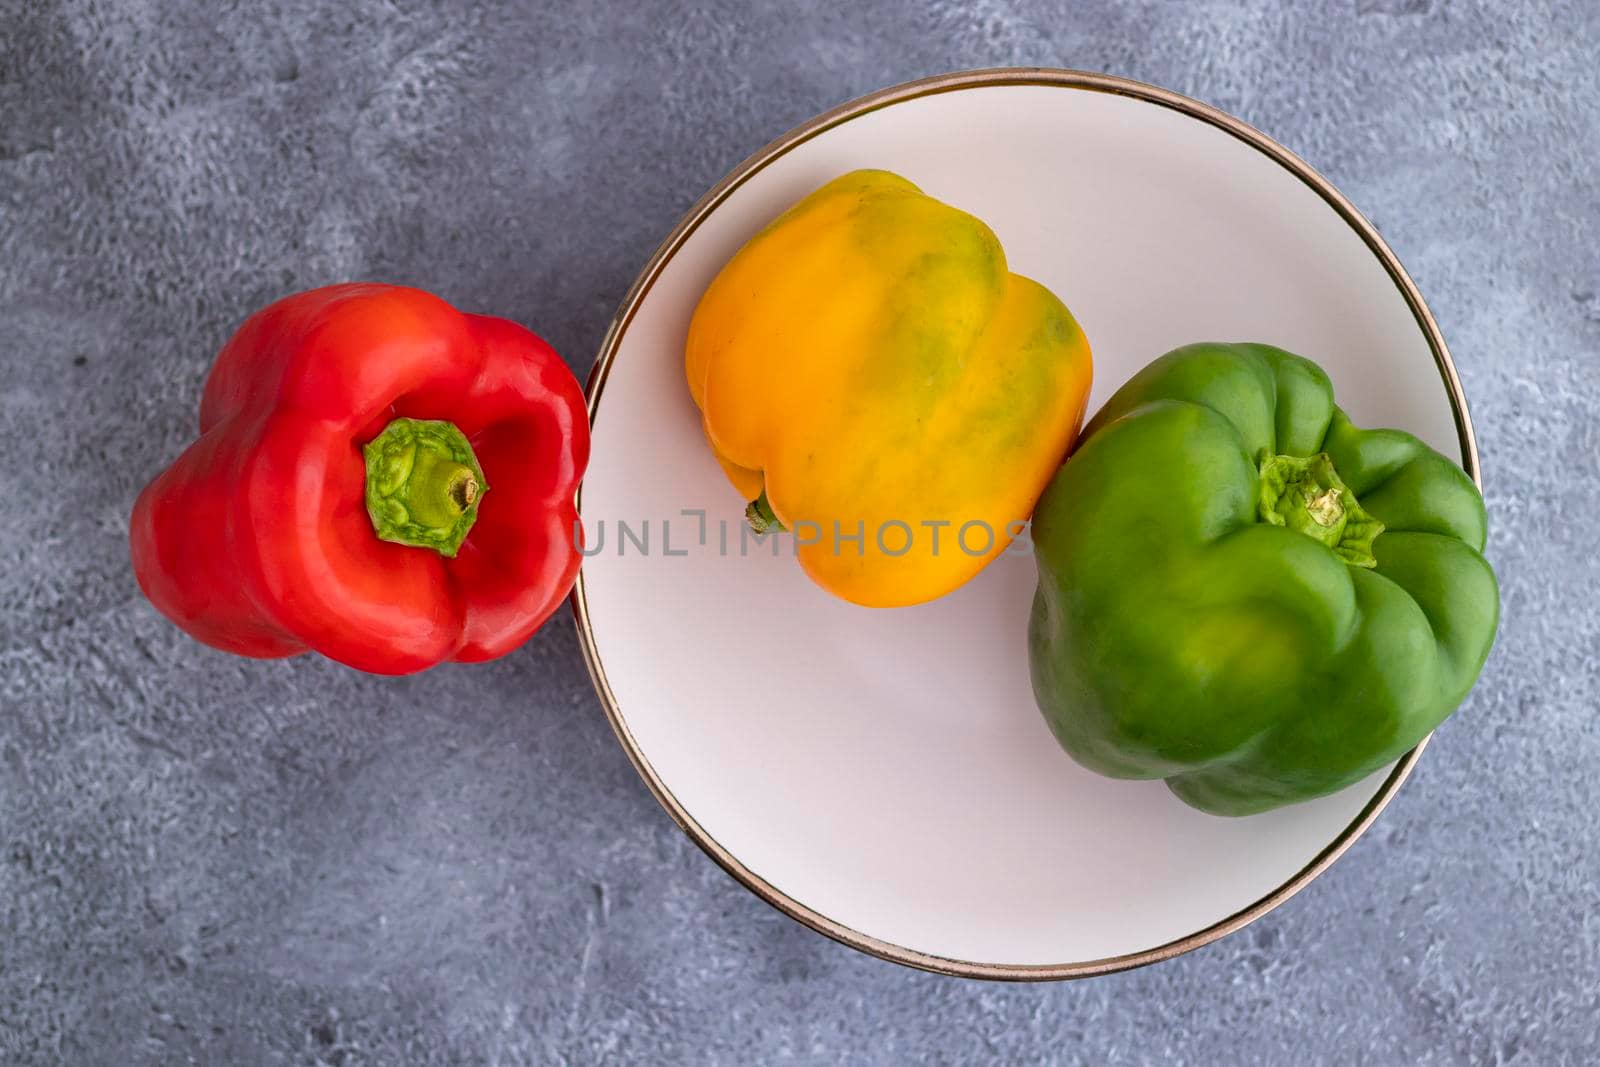 Aerial view of red, green and yellow peppers by eagg13